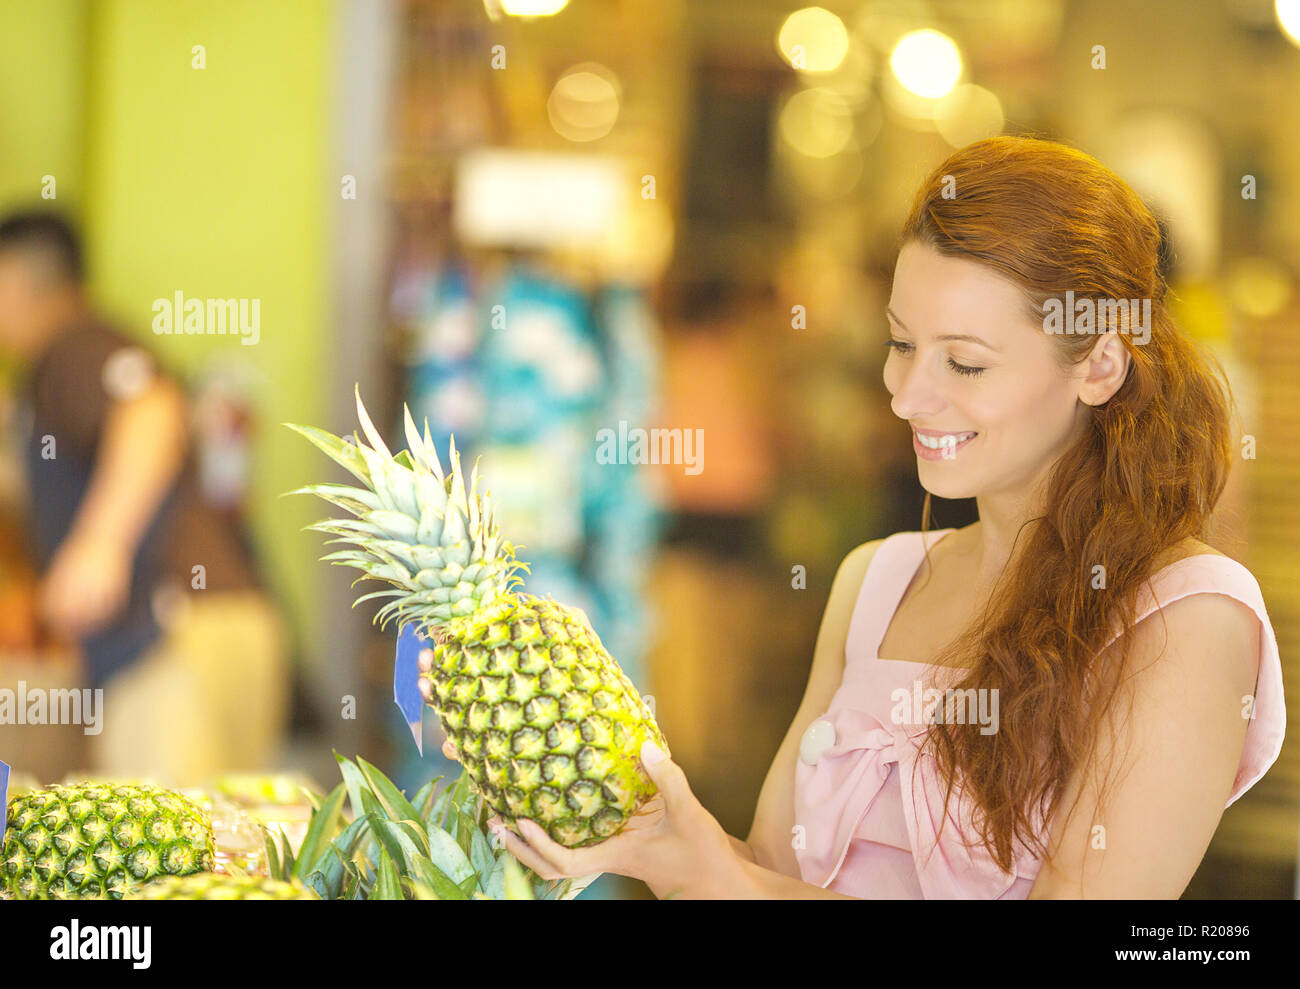 Charming young woman choosing pineapple while shopping in grocery store Stock Photo